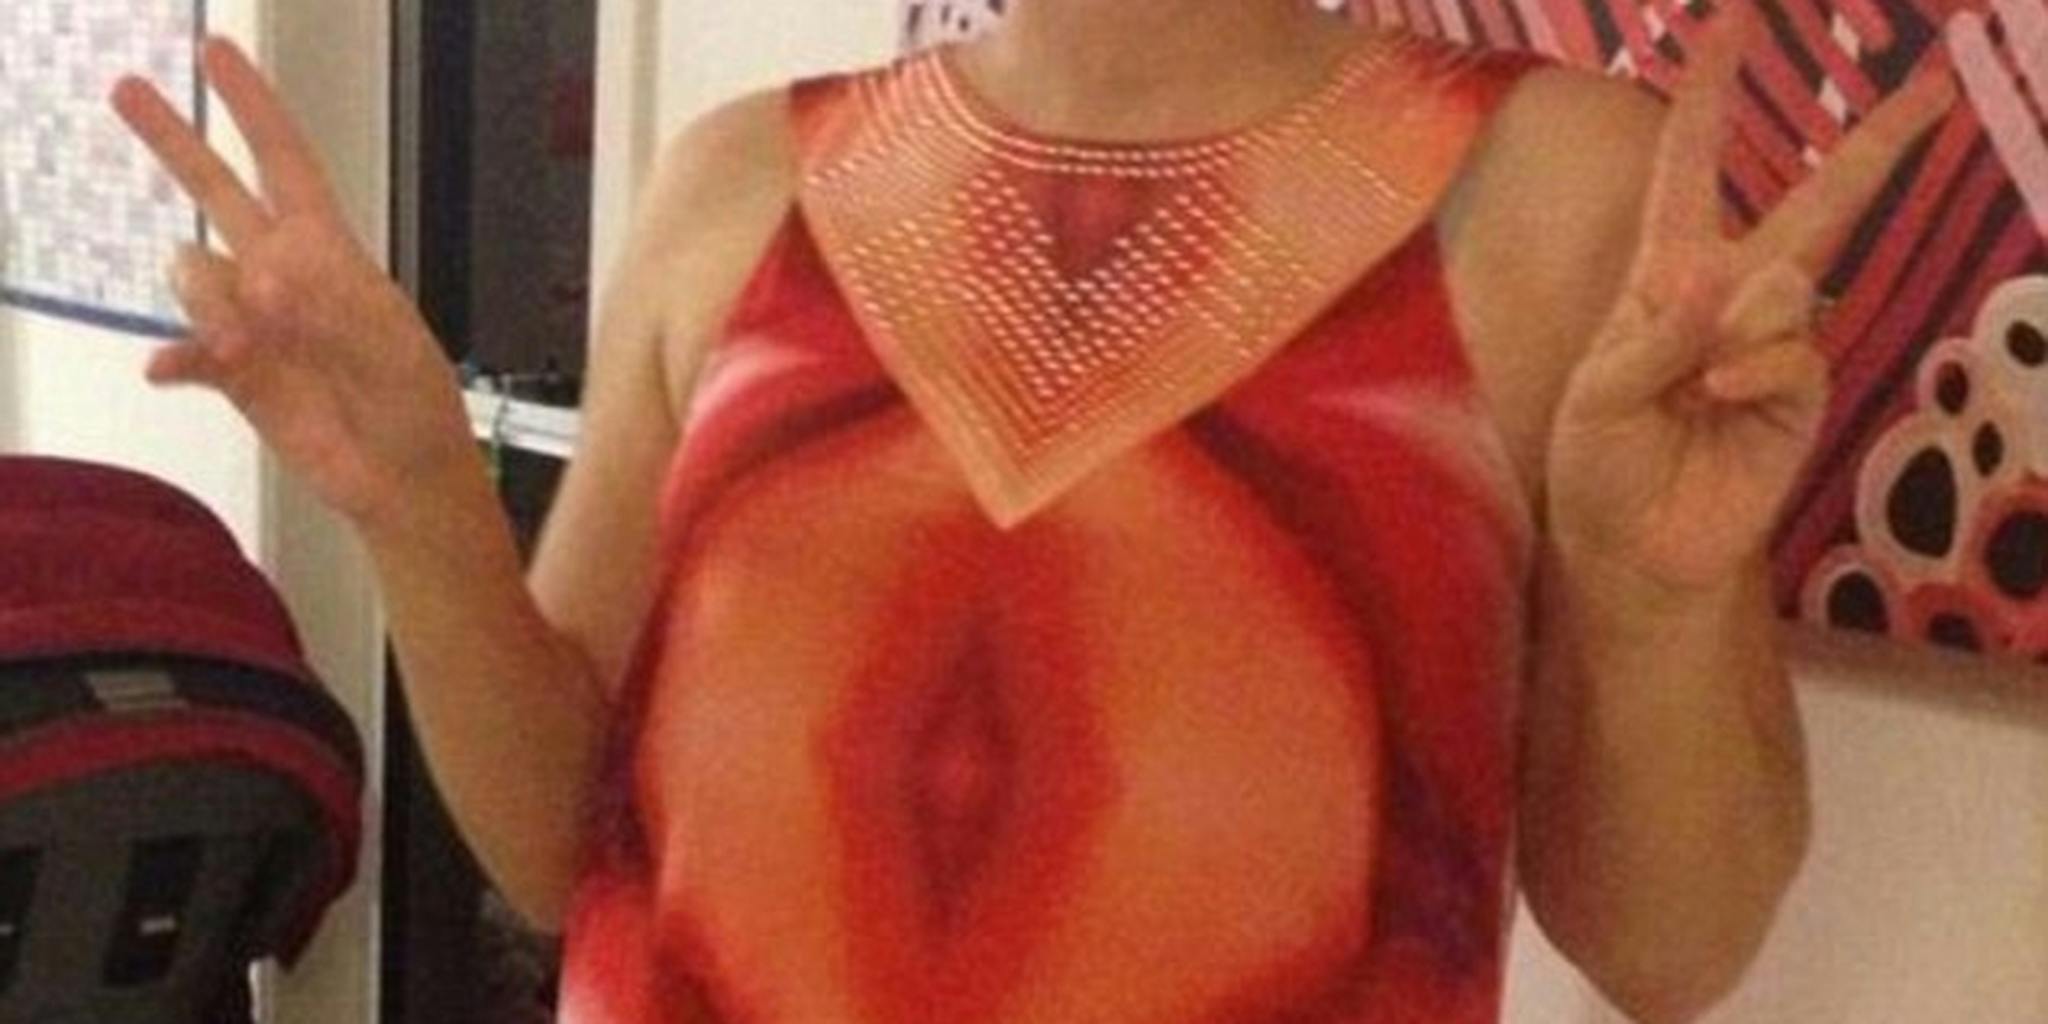 Does this dress look like a vagina to you?